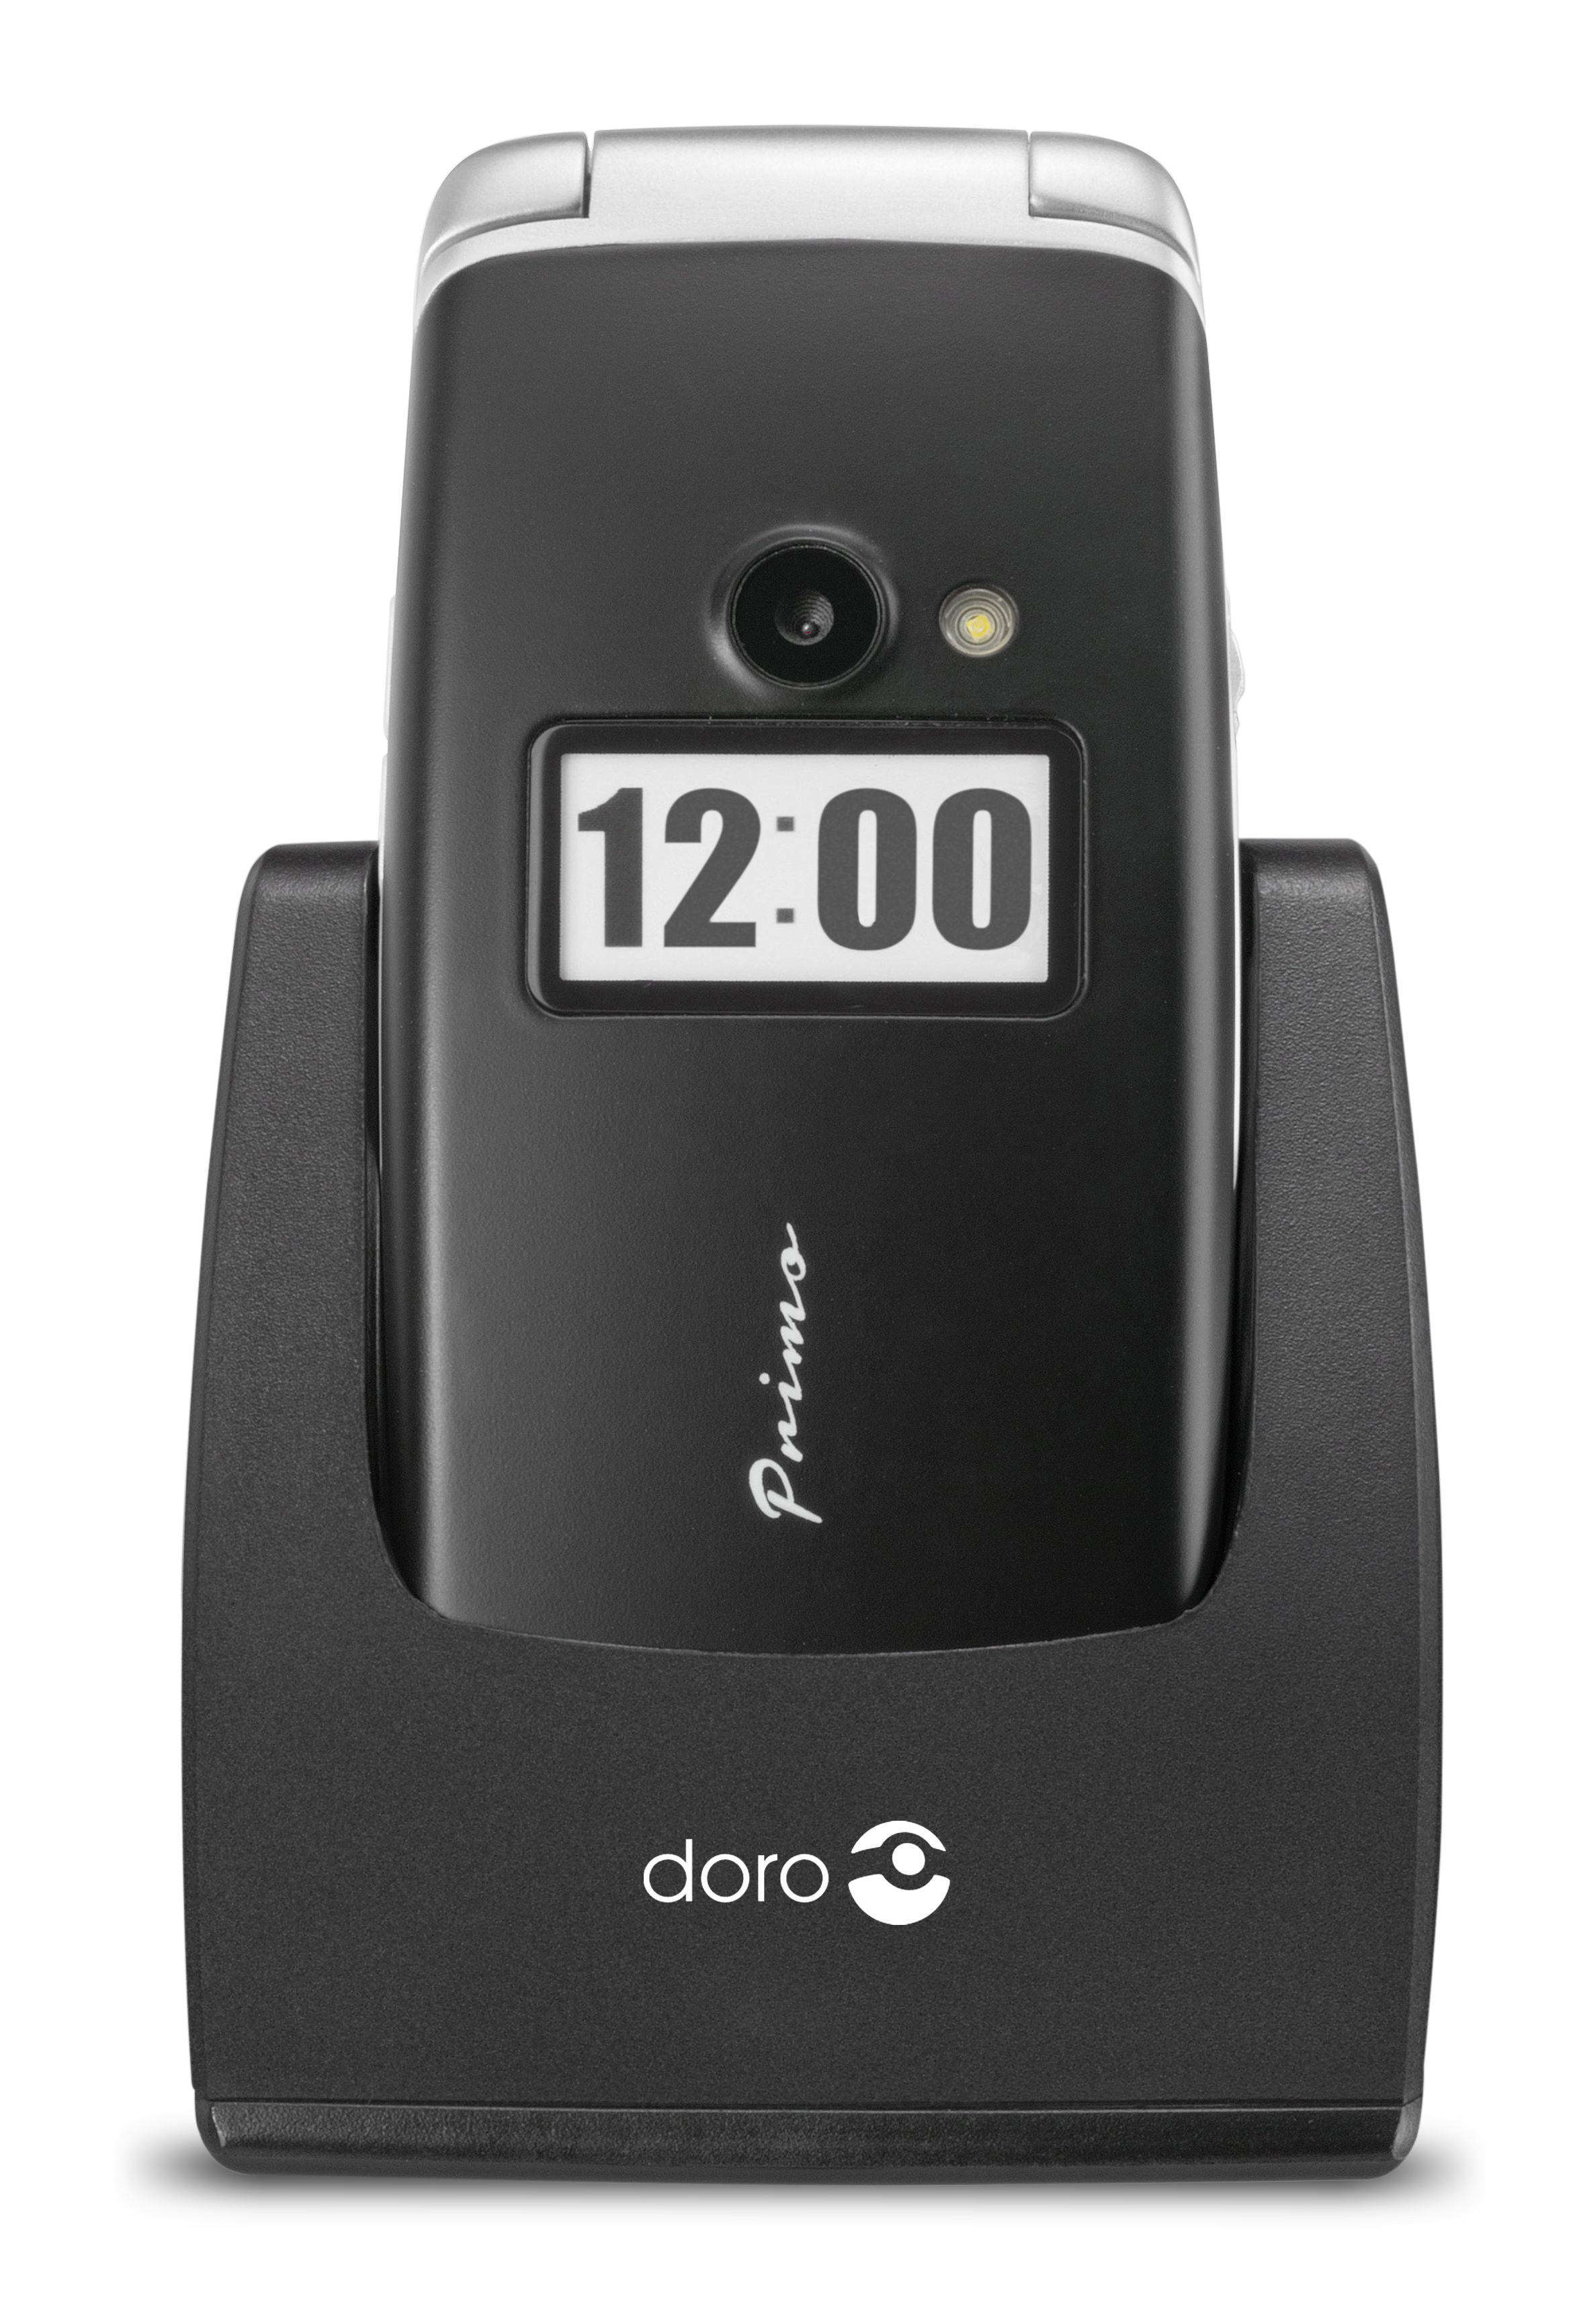 Image of Doro Primo 413 Black/silver - Basic Clamshell Mobile Phone